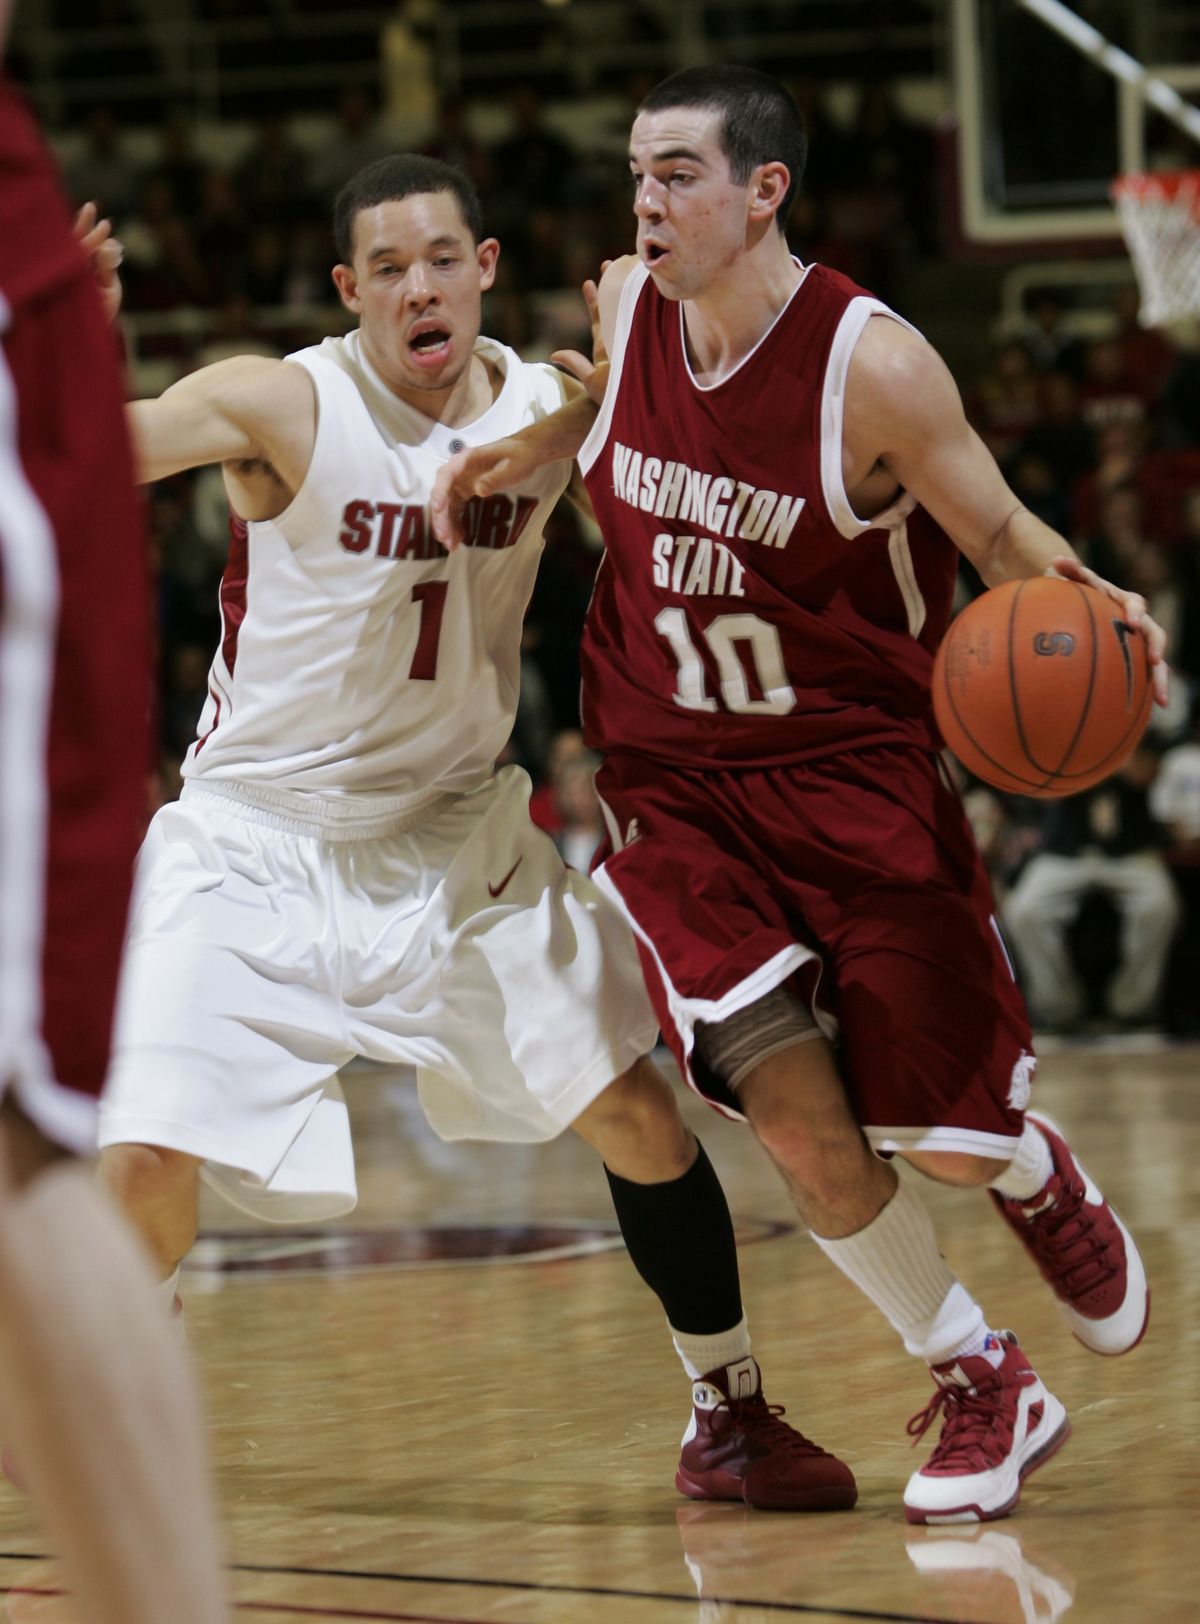 Washington State guard Taylor Rochestie is covered by Stanford guard Mitch Johnson. Stanford defeated Washington State 65-54. (Paul Sakuma / Associated Press)